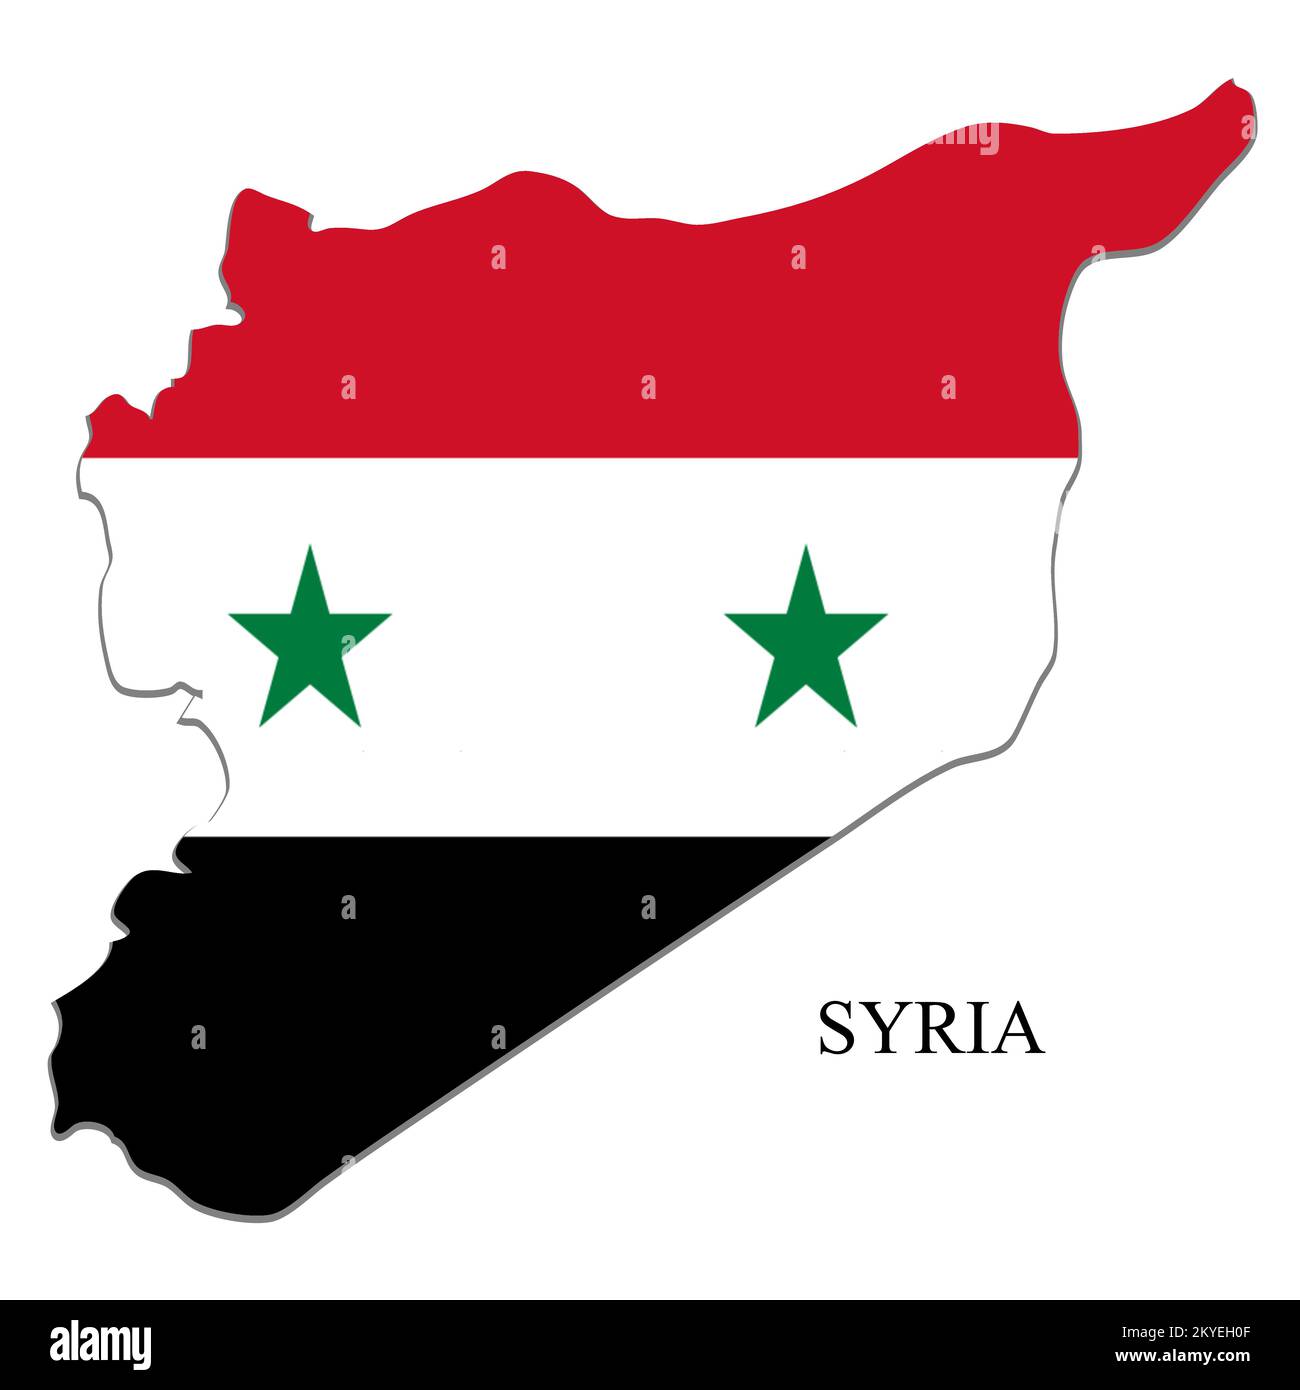 Syria map vector illustration. Global economy. Famous country. Middle East. West Asia. Stock Vector